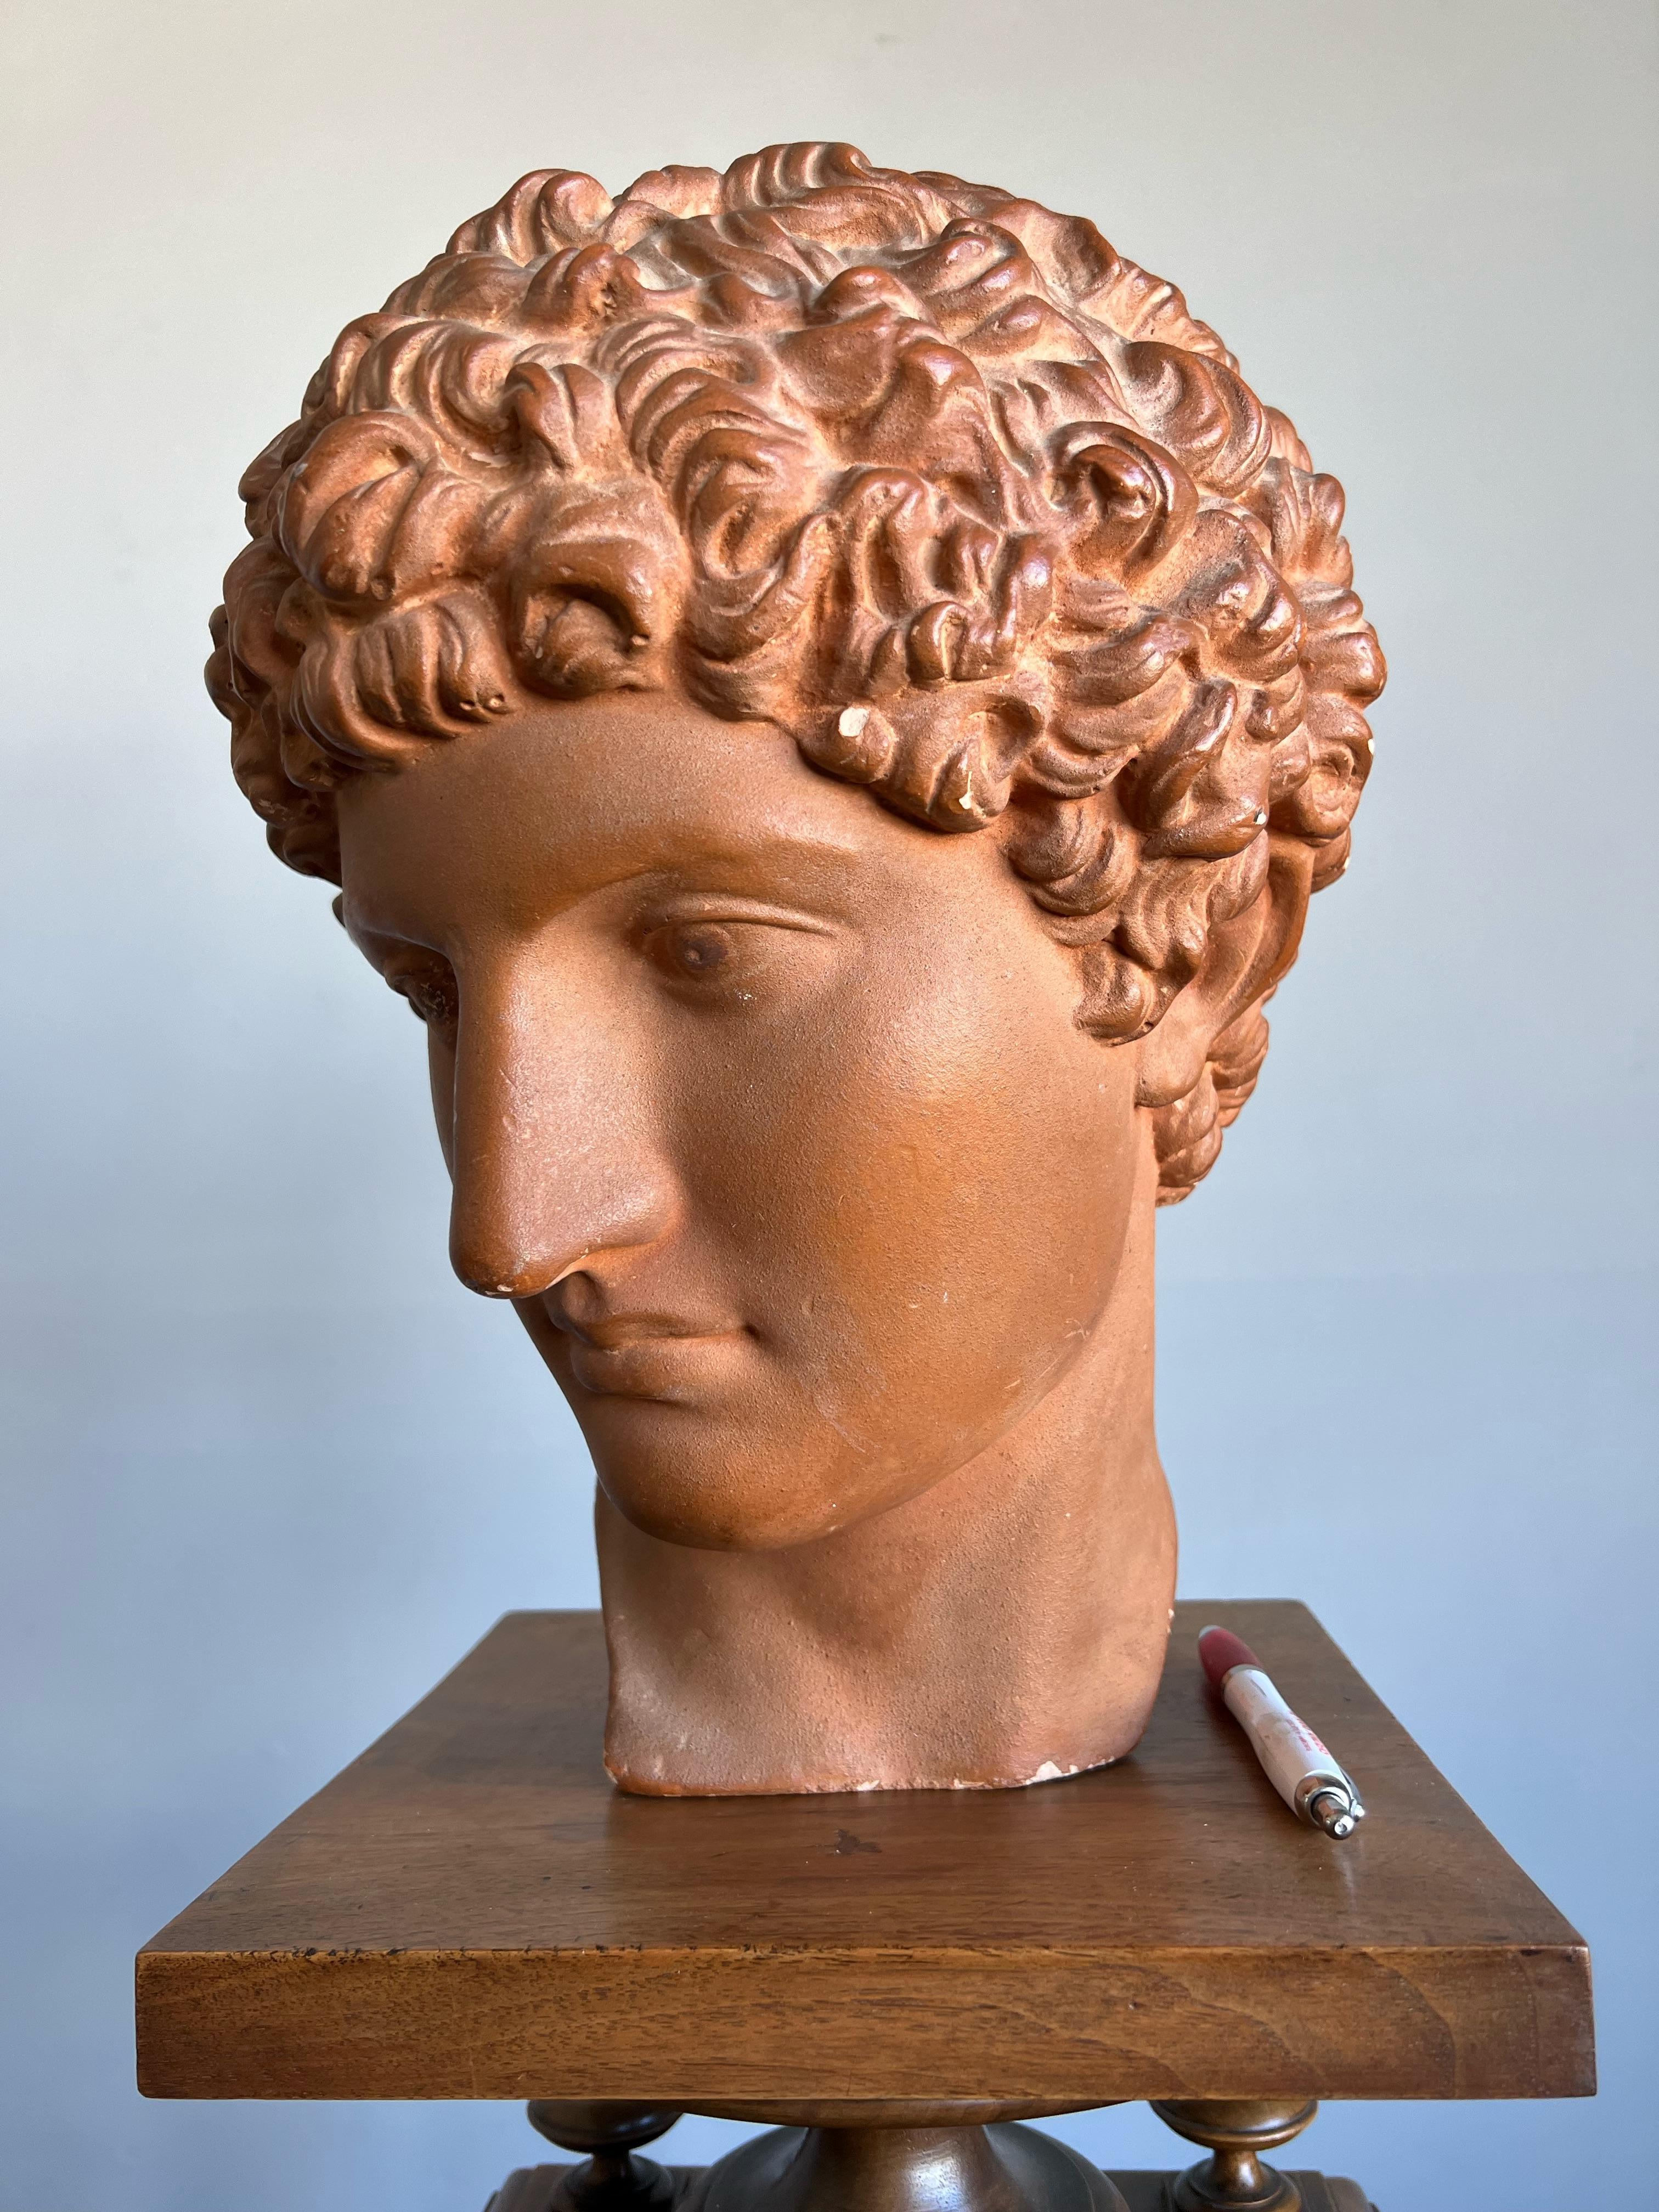 Hand-Crafted Great Antique and Signed Plaster Bust / Head on a Wooden Base Greek God Hermes